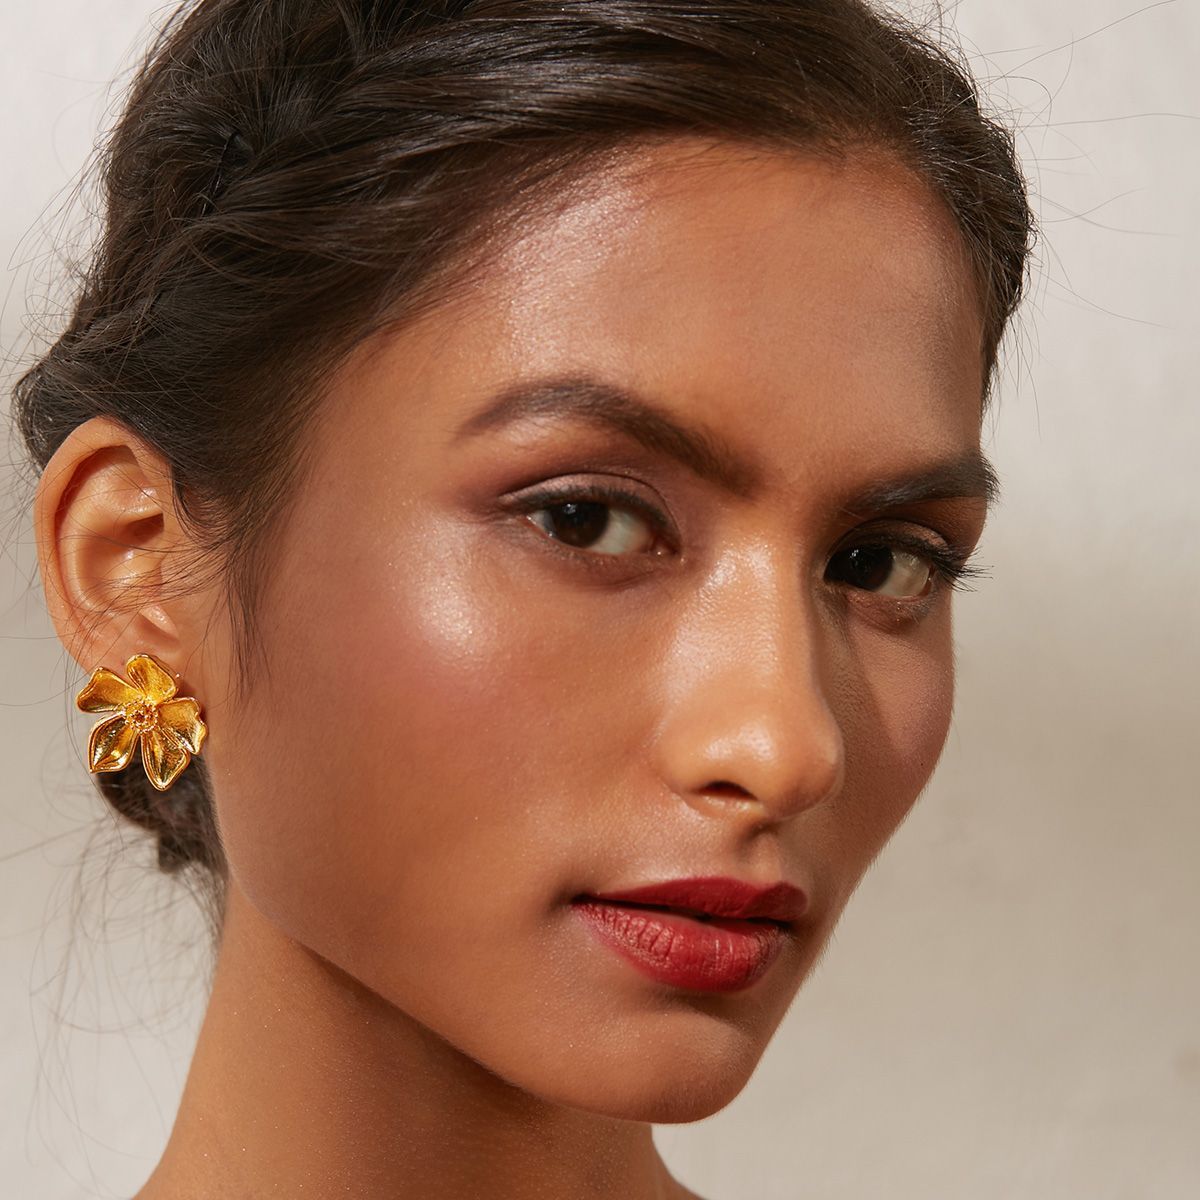 Flower-shaped Earrings - Gold-colored - Ladies | H&M US